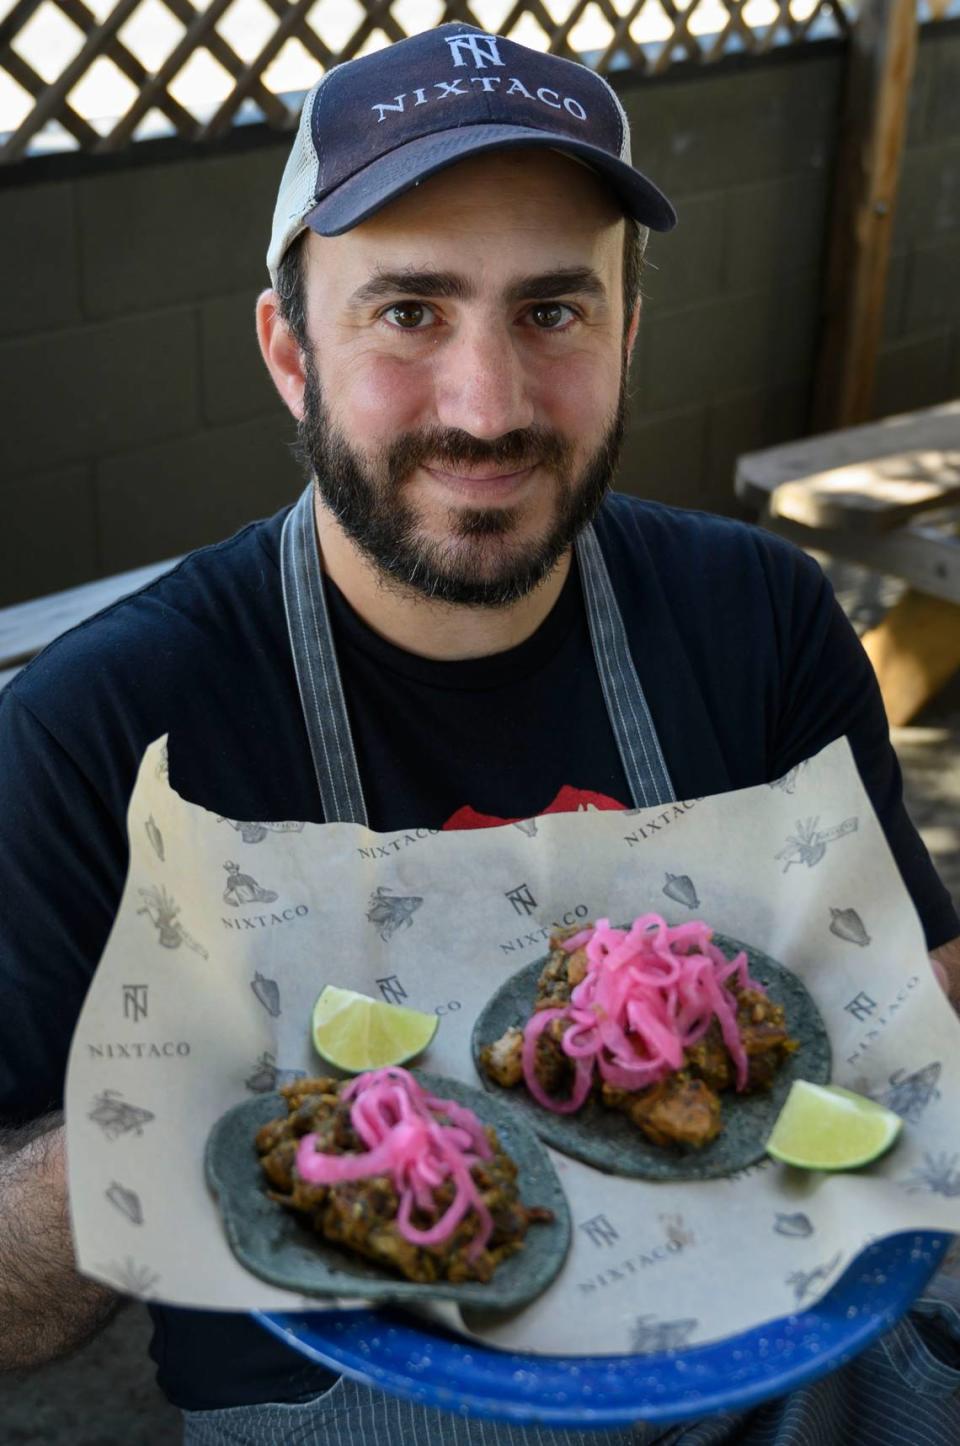 Patricio Wise, chef and proprietor at Nixtaco in Roseville, holds a plate of chicharron tacos in 2019. The renowned Mexican restaurant retained its Bib Gourmand status for the coming year.